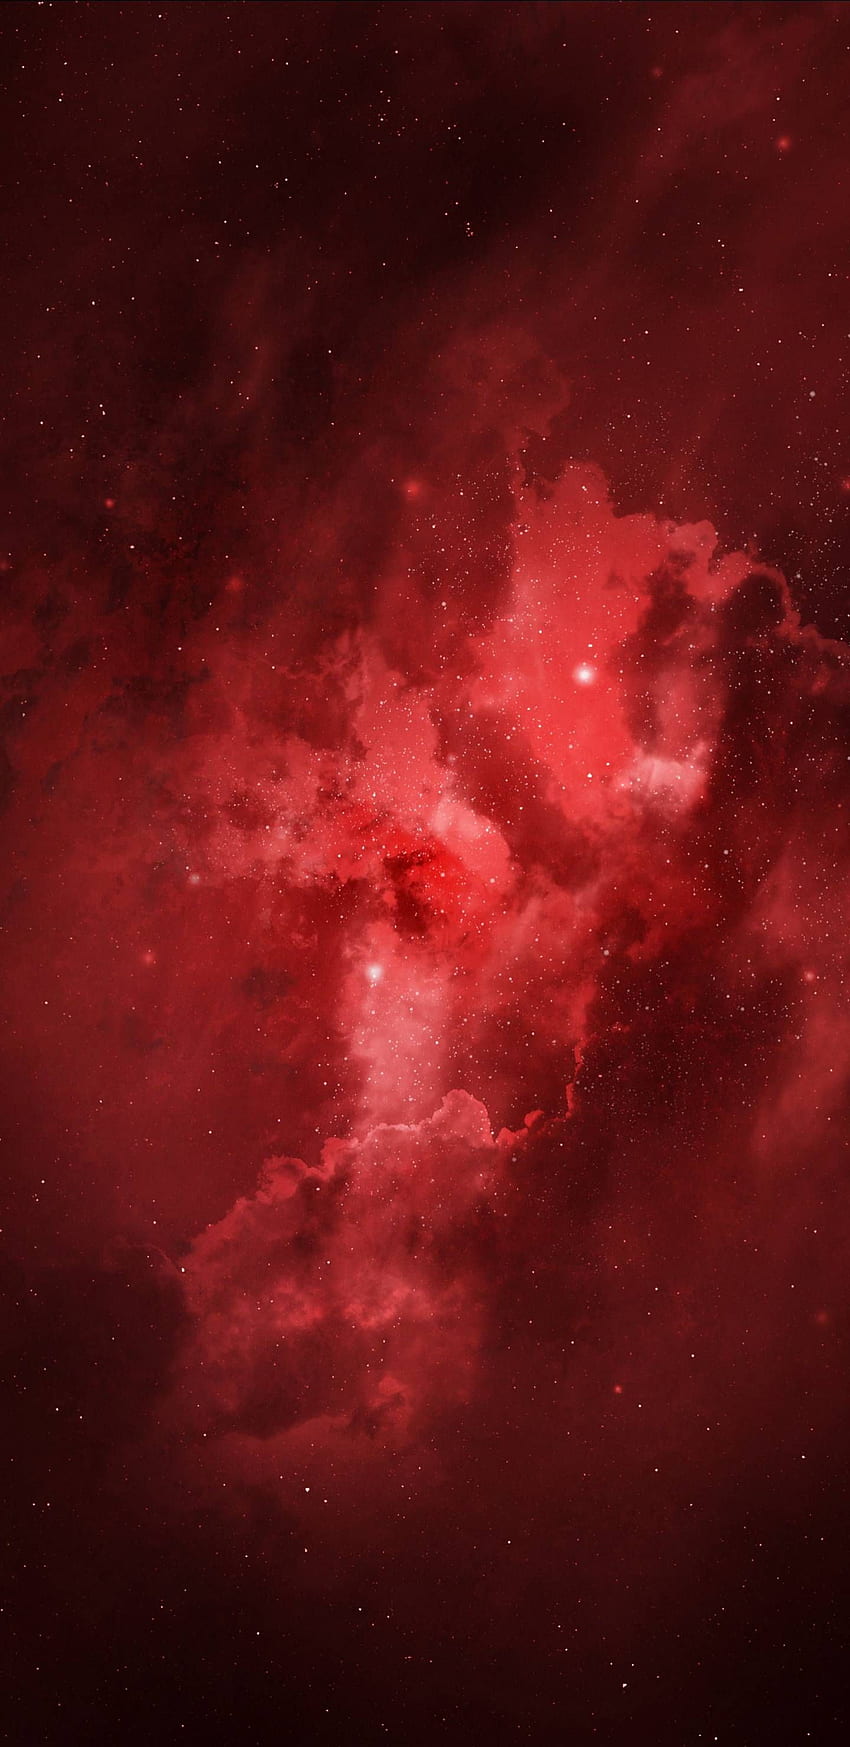 HD wallpaper: nebula, red, space, night, astronomy, star - space, sky,  nature | Wallpaper Flare